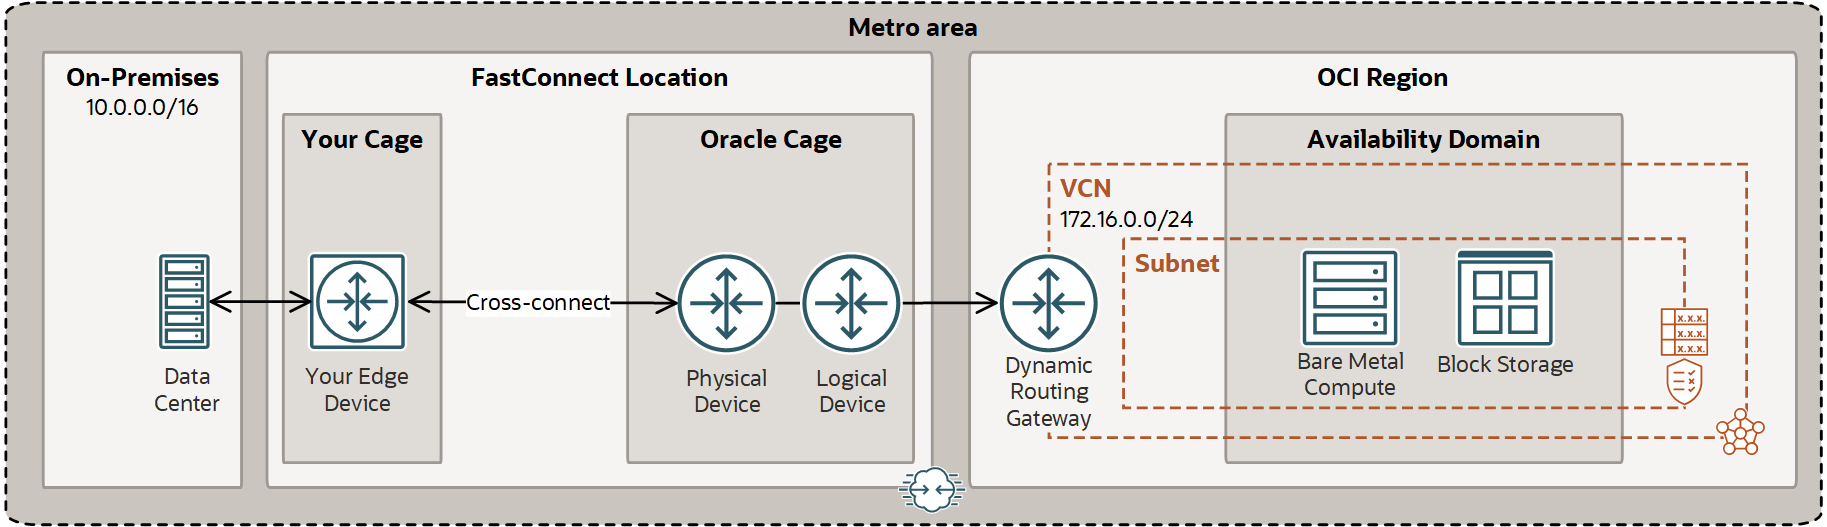 This image shows the colocation scenario with basic physical connection details